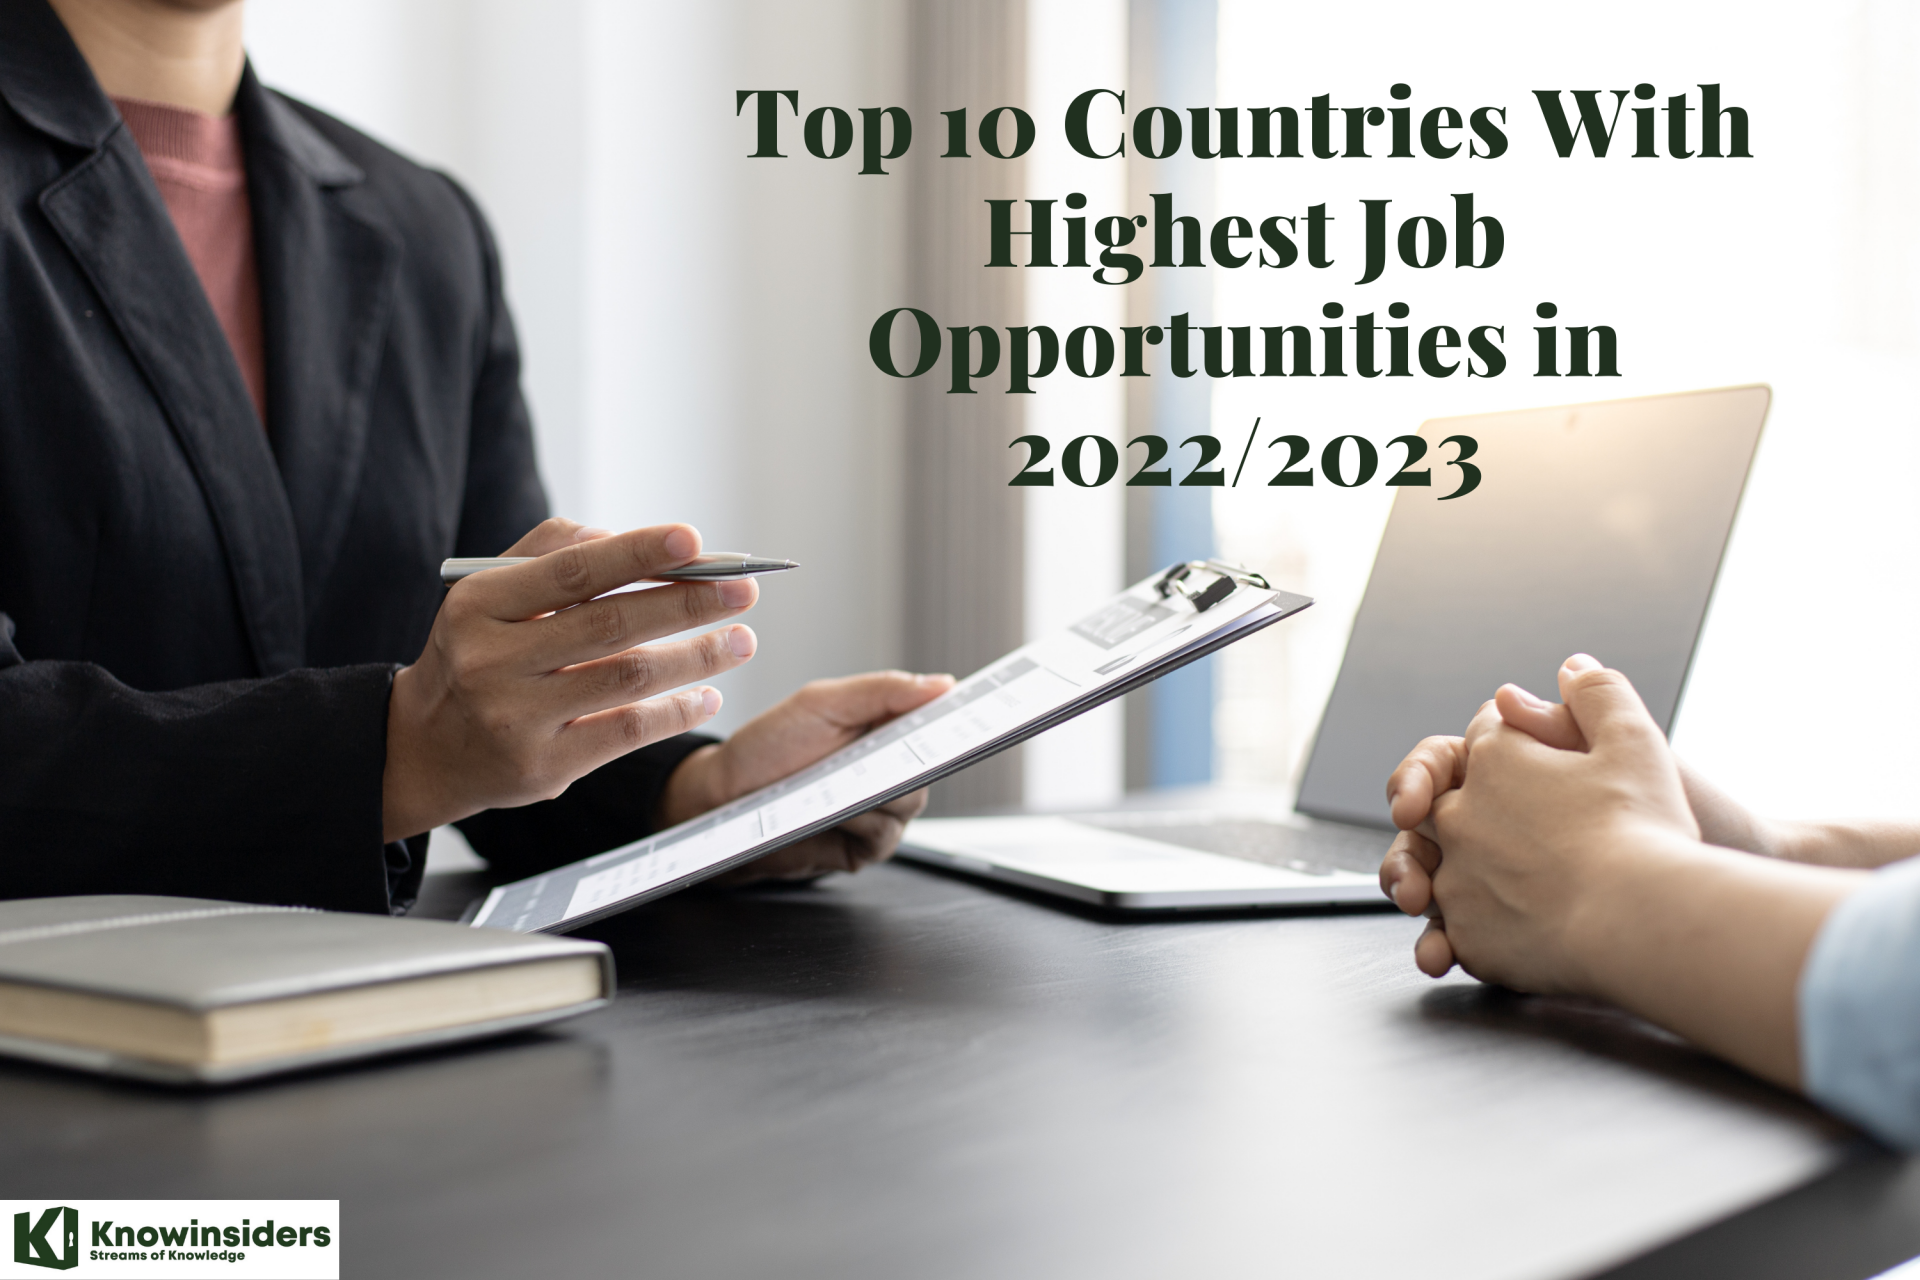 Top 10 Countries With Highest Job Opportunities to Start A Career in 2022/2023